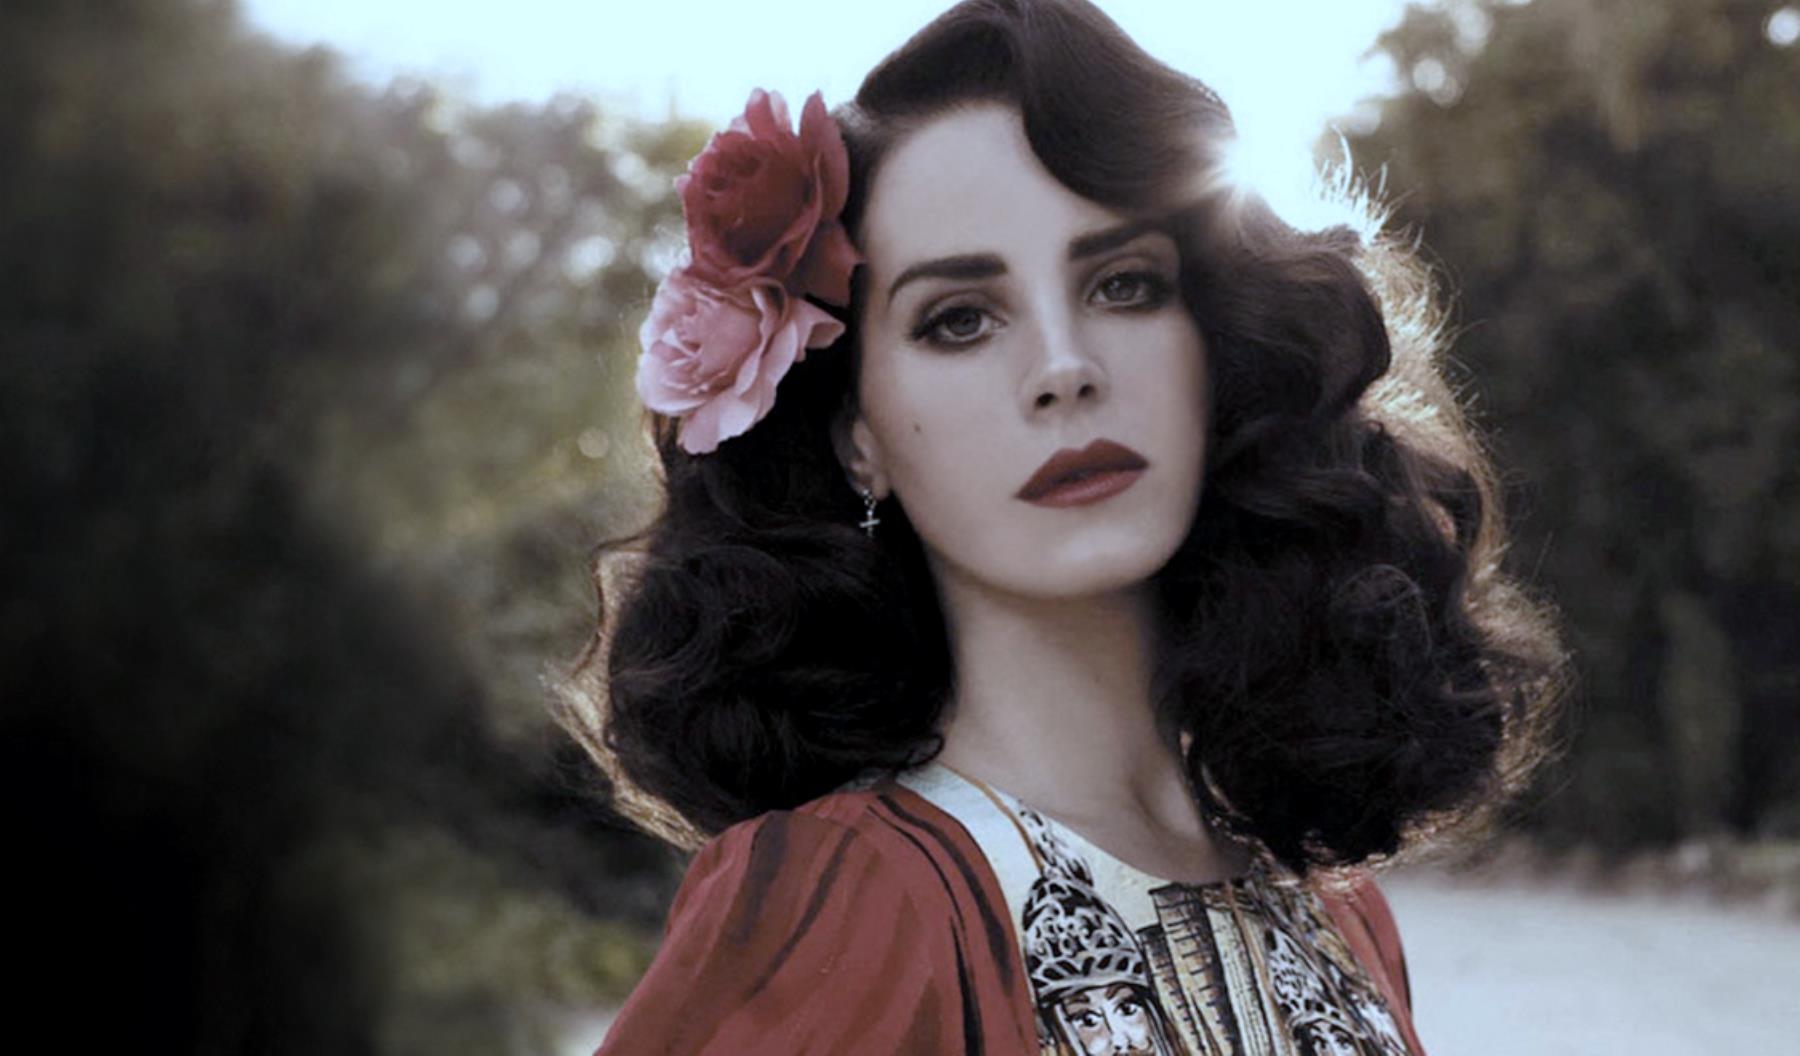 Dark haired woman with a flower in her hair and red lipstick - Lana Del Rey